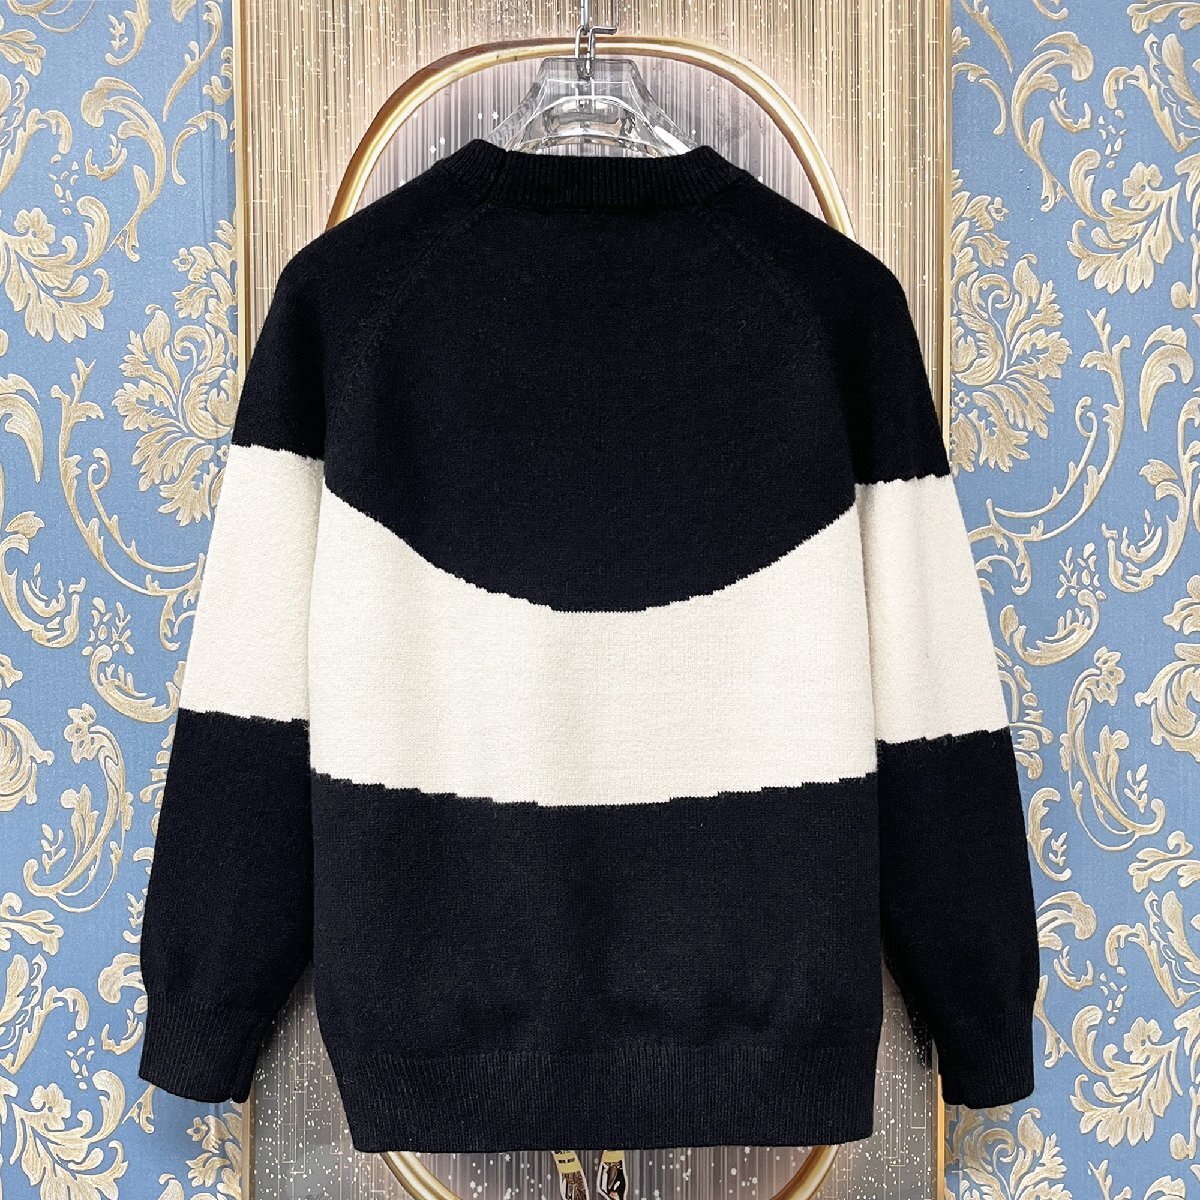  regular price 5 ten thousand *christian milada* milano departure * sweater * on goods heat insulation soft switch knitted tops clean . put on .. elegant lady's M/36